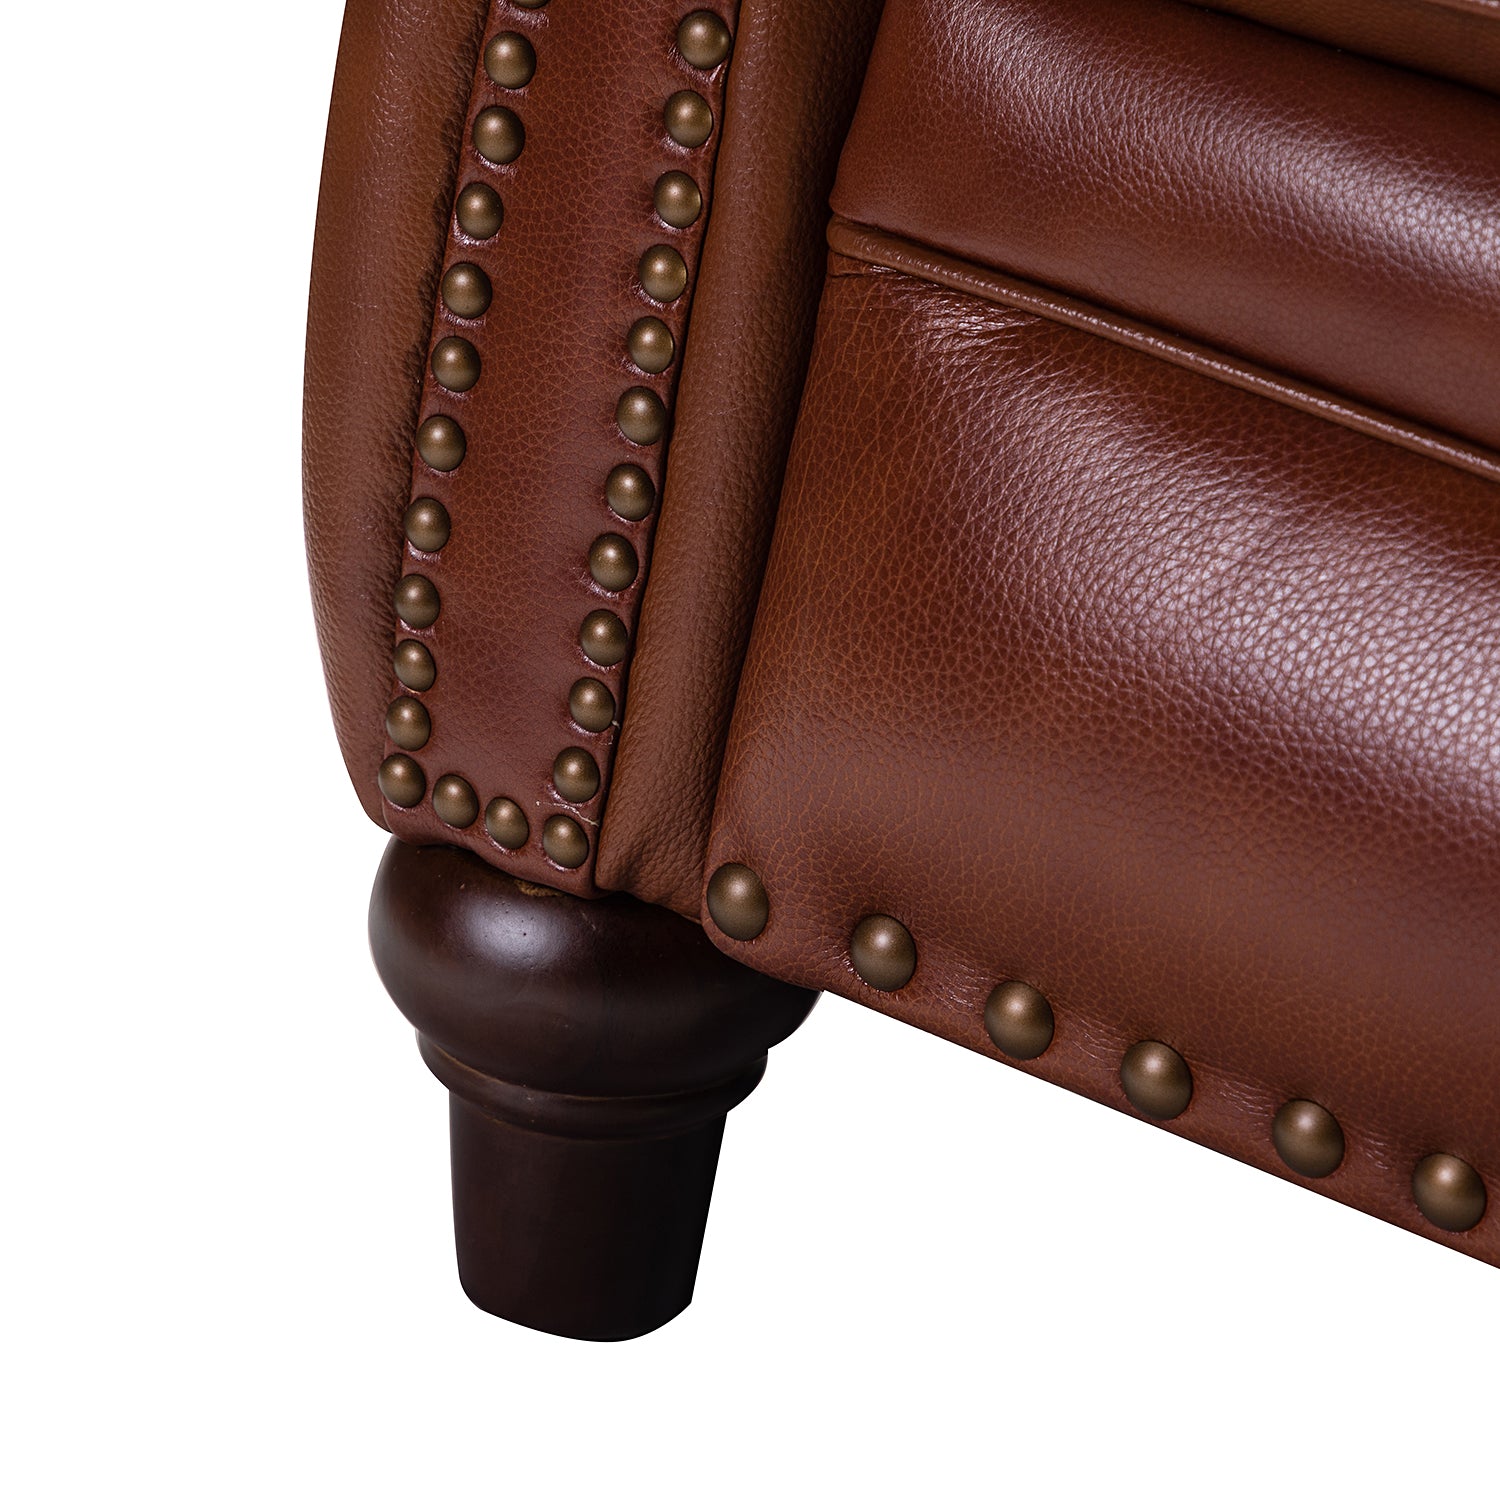 Annabelle Leather Recliner